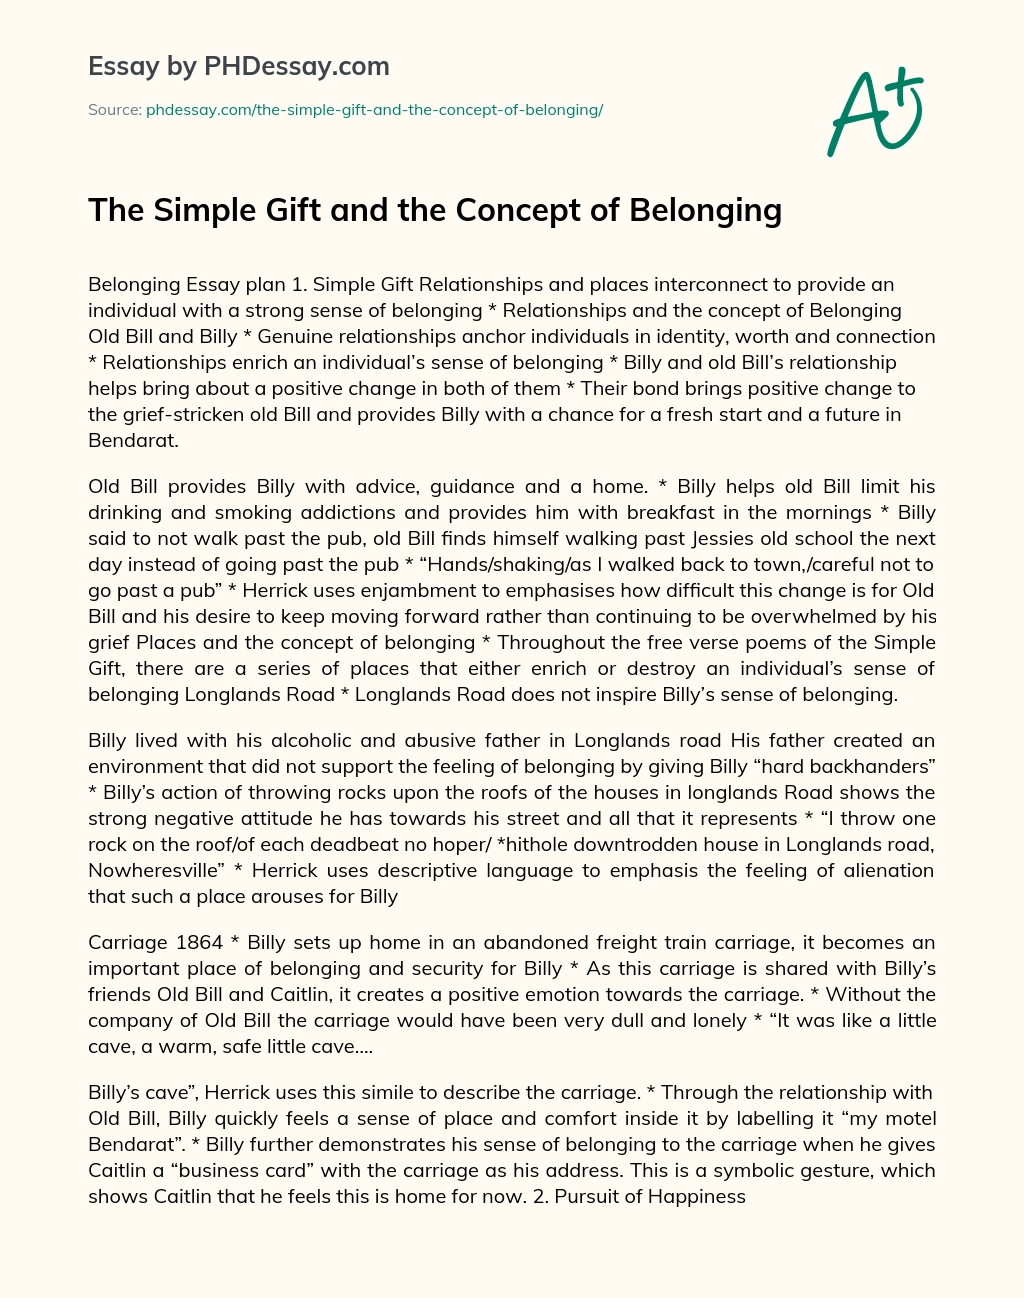 The Simple Gift and the Concept of Belonging essay